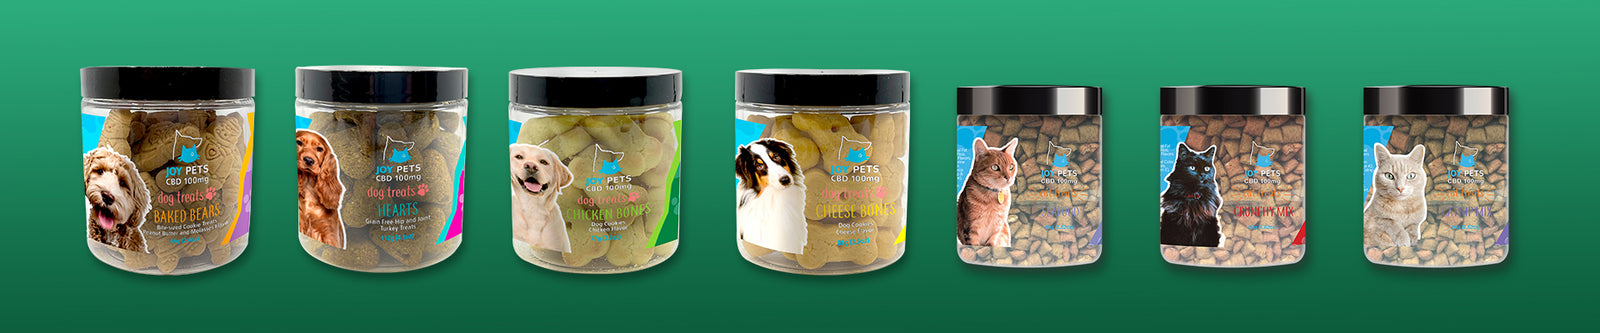 Four jars of Joypets CBD dog treats and three jars of CBD cat treats against a green gradient background. The best CBD for pet relief.